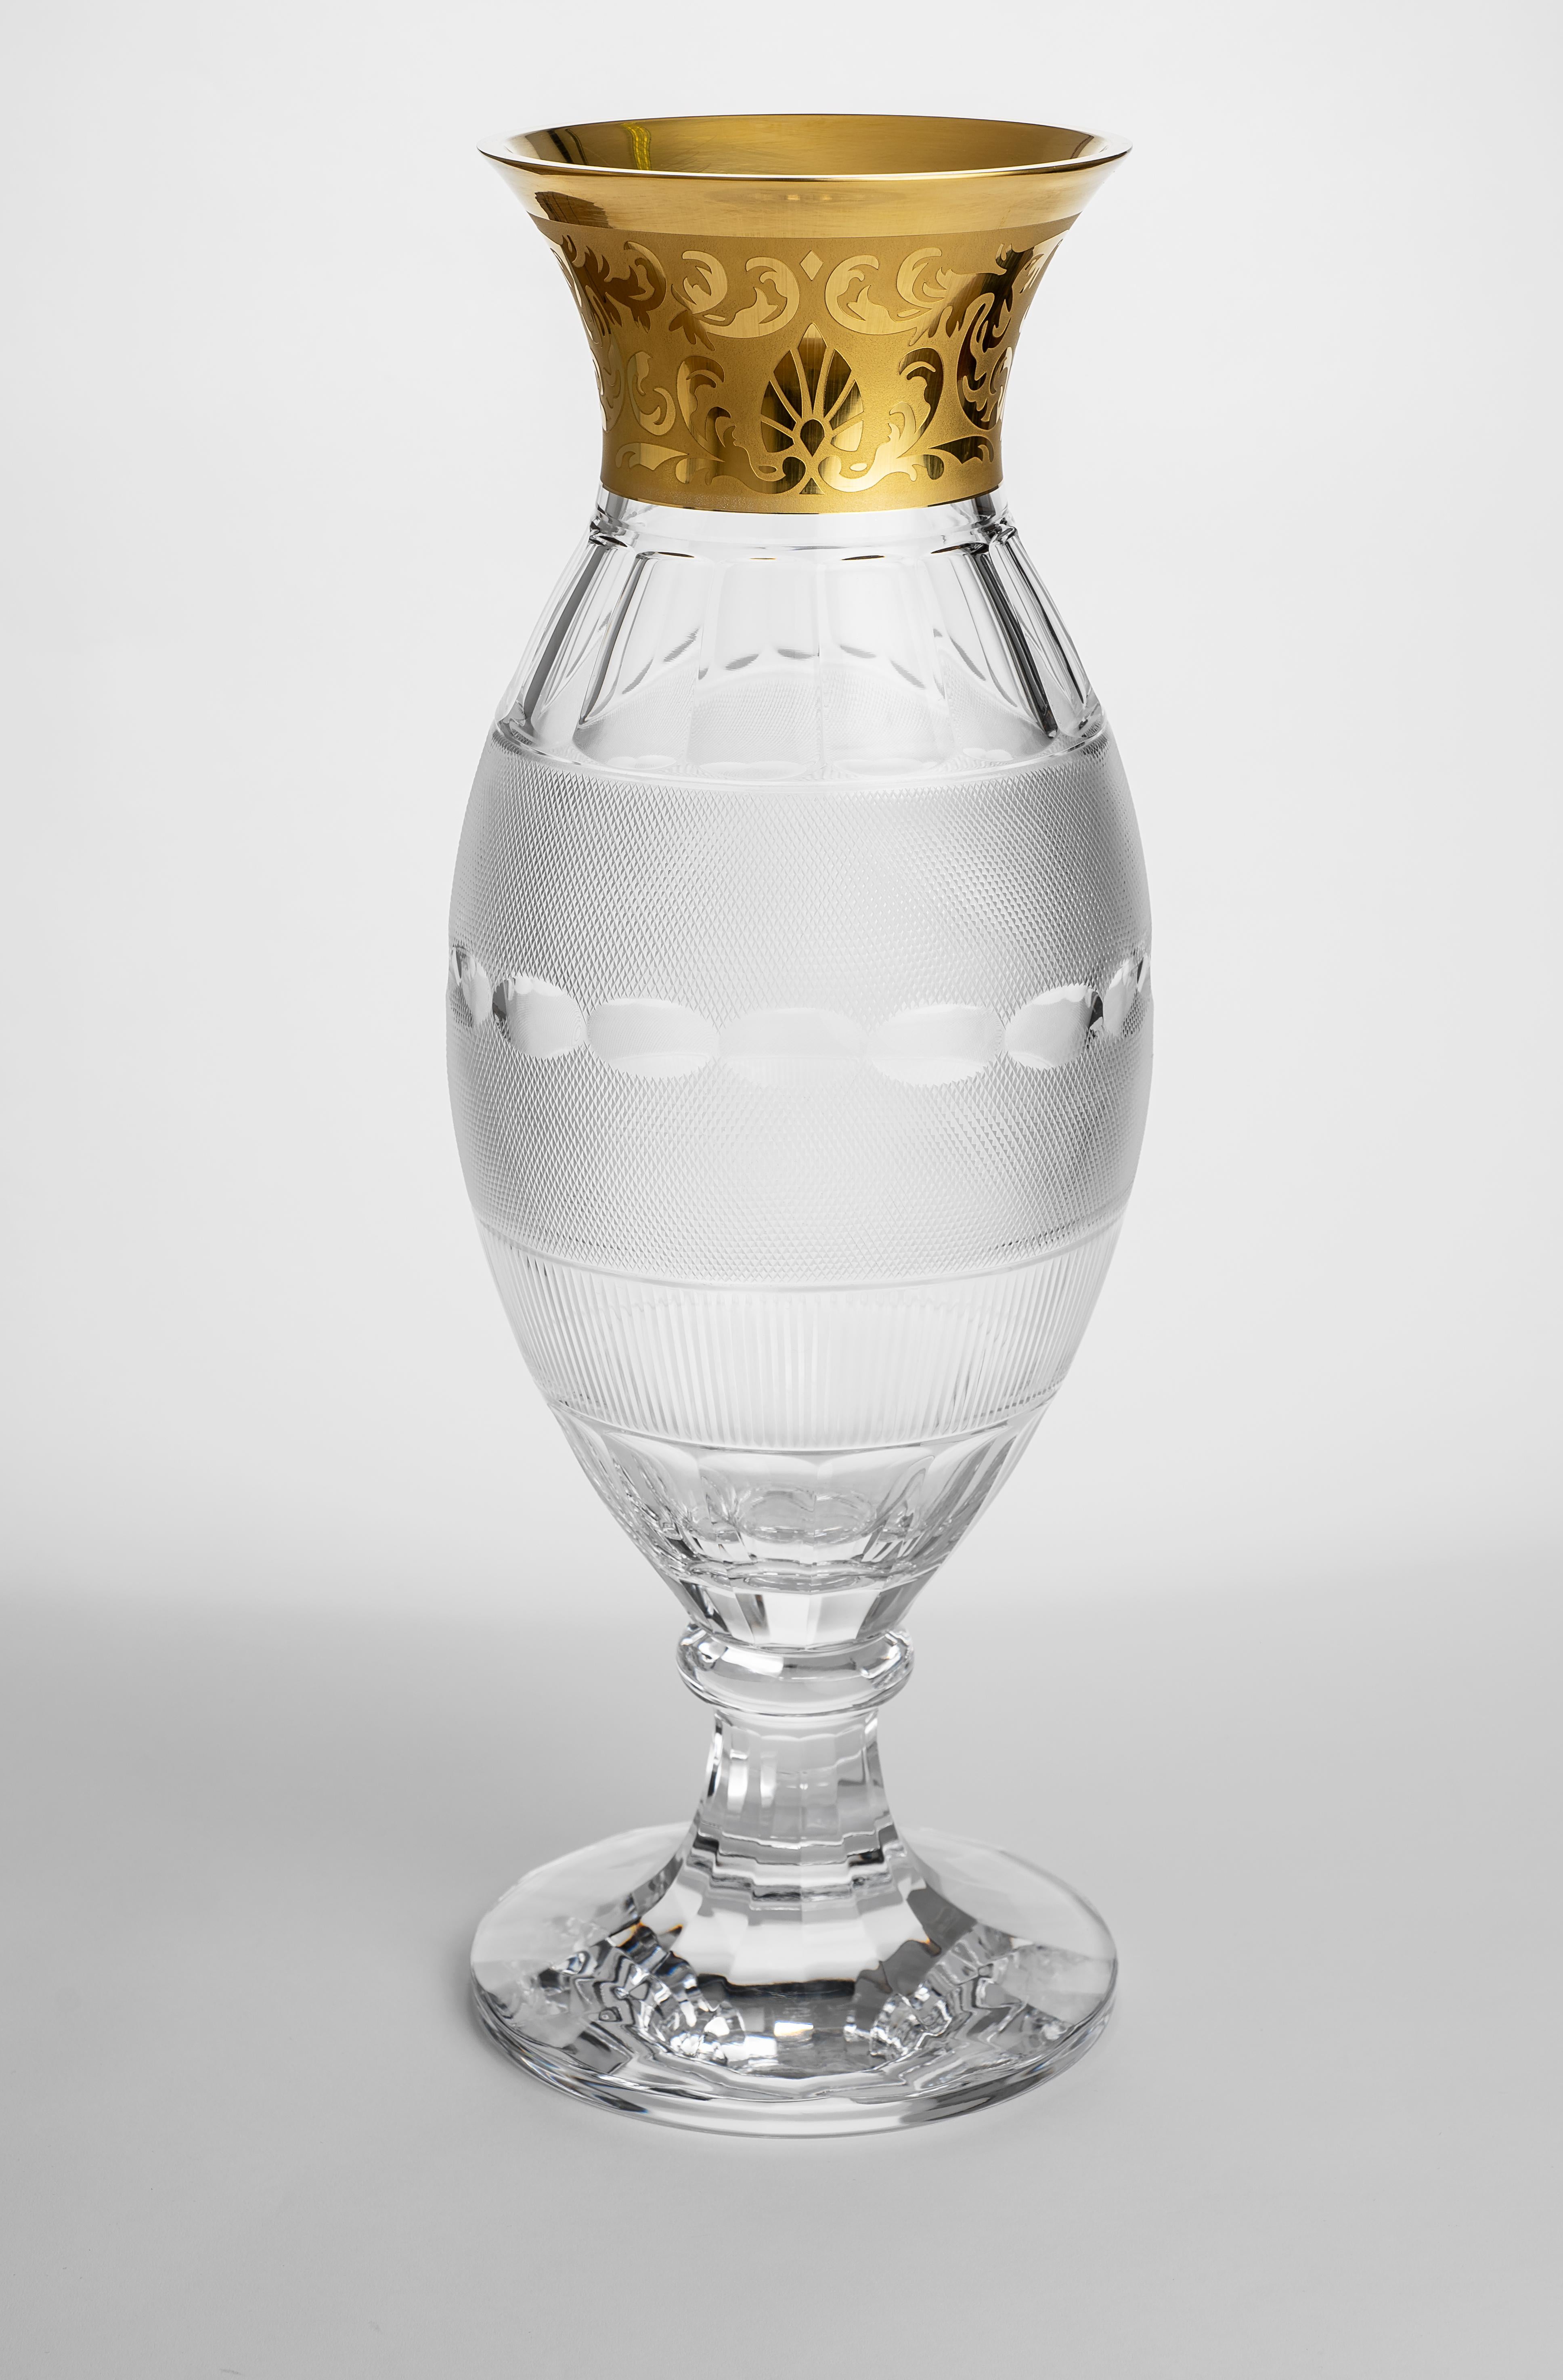 Leo Moser and his glassmakers in 1911 created a formal drinking collection that continues to shine at
royal banquets and light up the tables at all kinds of celebratory occasions.
Splendid holds the attention with its combination of an elegant